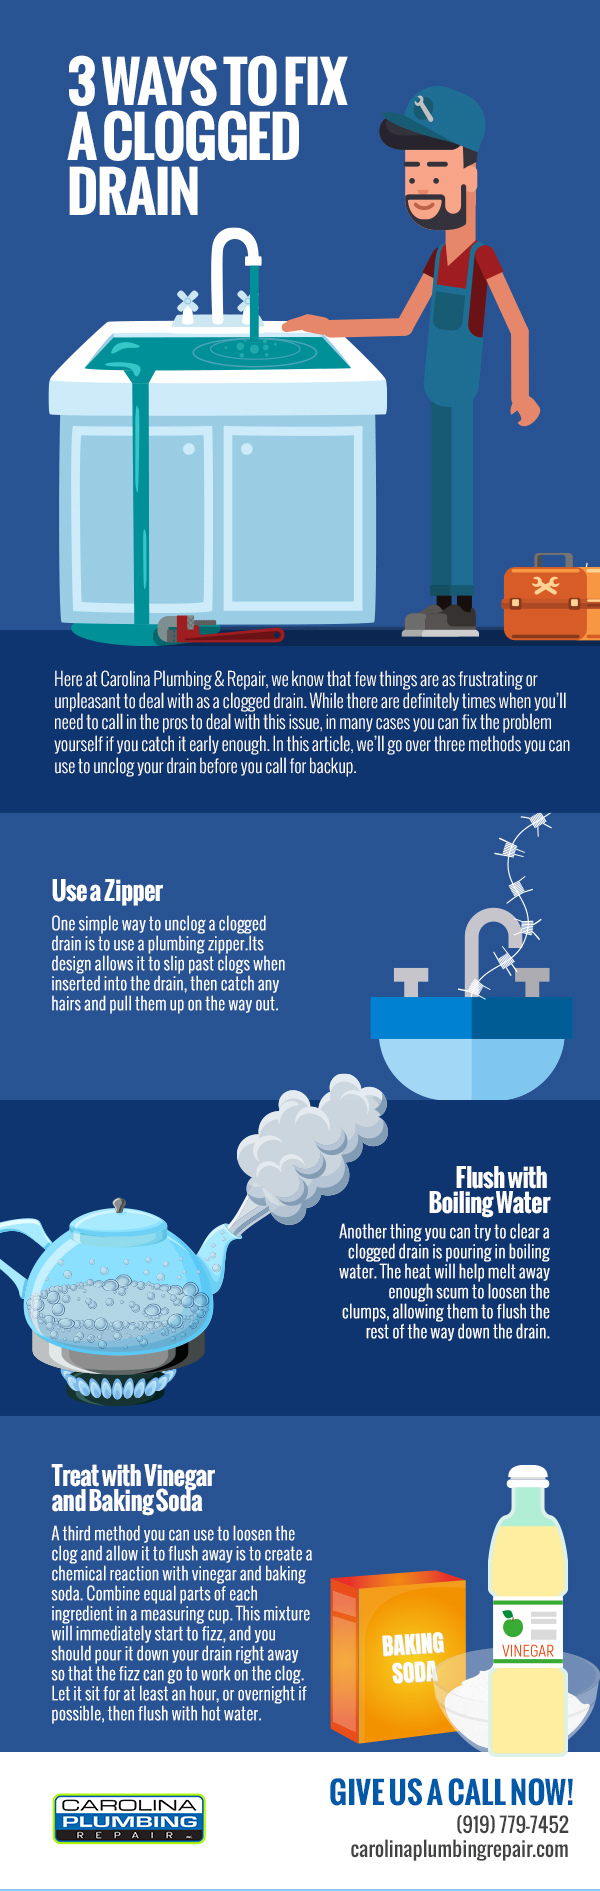 3 Ways to Fix a Clogged Drain [infographic]